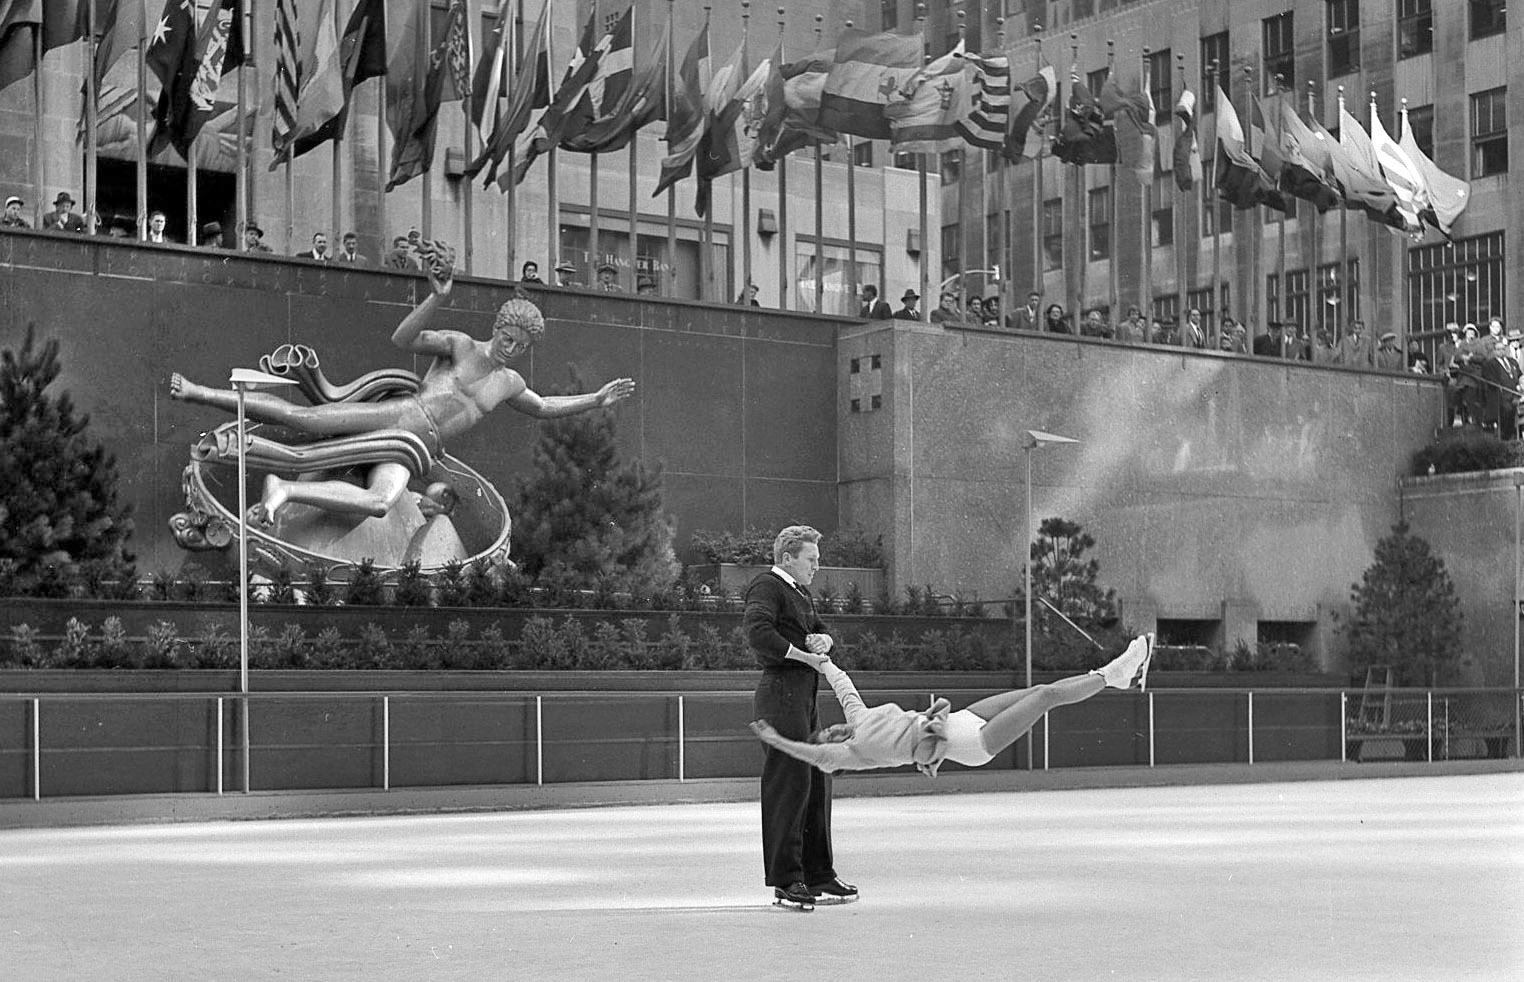 My grandfather took this photo of professional skaters putting on a show at New York's Rockefeller Center rink in November, 1954. I think the gesture of the sculpture with its arms upheld really works with the skaters. View full size.